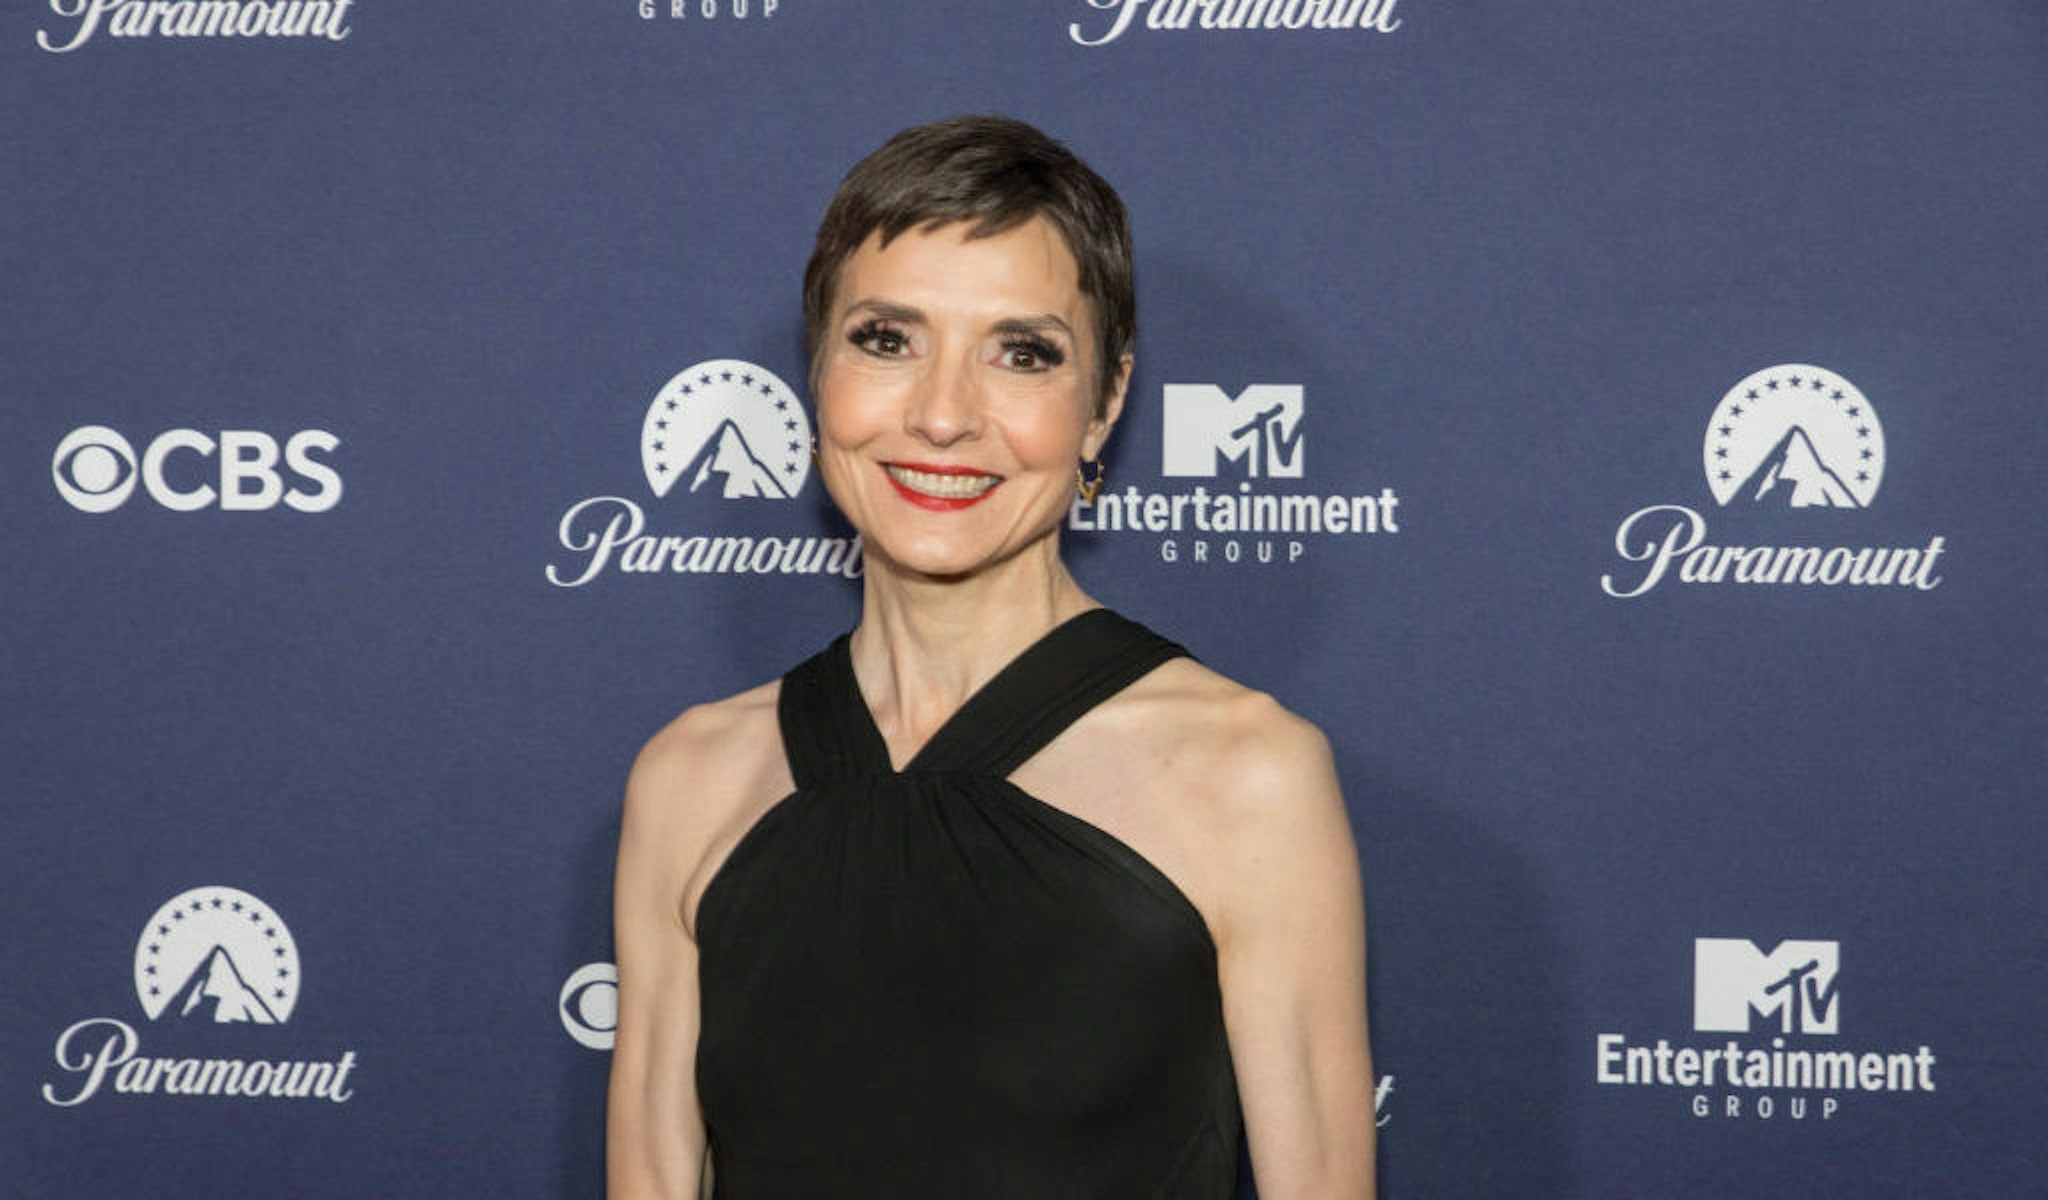 WASHINGTON, DC - APRIL 30: Catherine Herridge attends Paramount’s White House Correspondents’ Dinner after party at the Residence of the French Ambassador on April 30, 2022 in Washington, DC. (Photo by Shedrick Pelt/Getty Images)